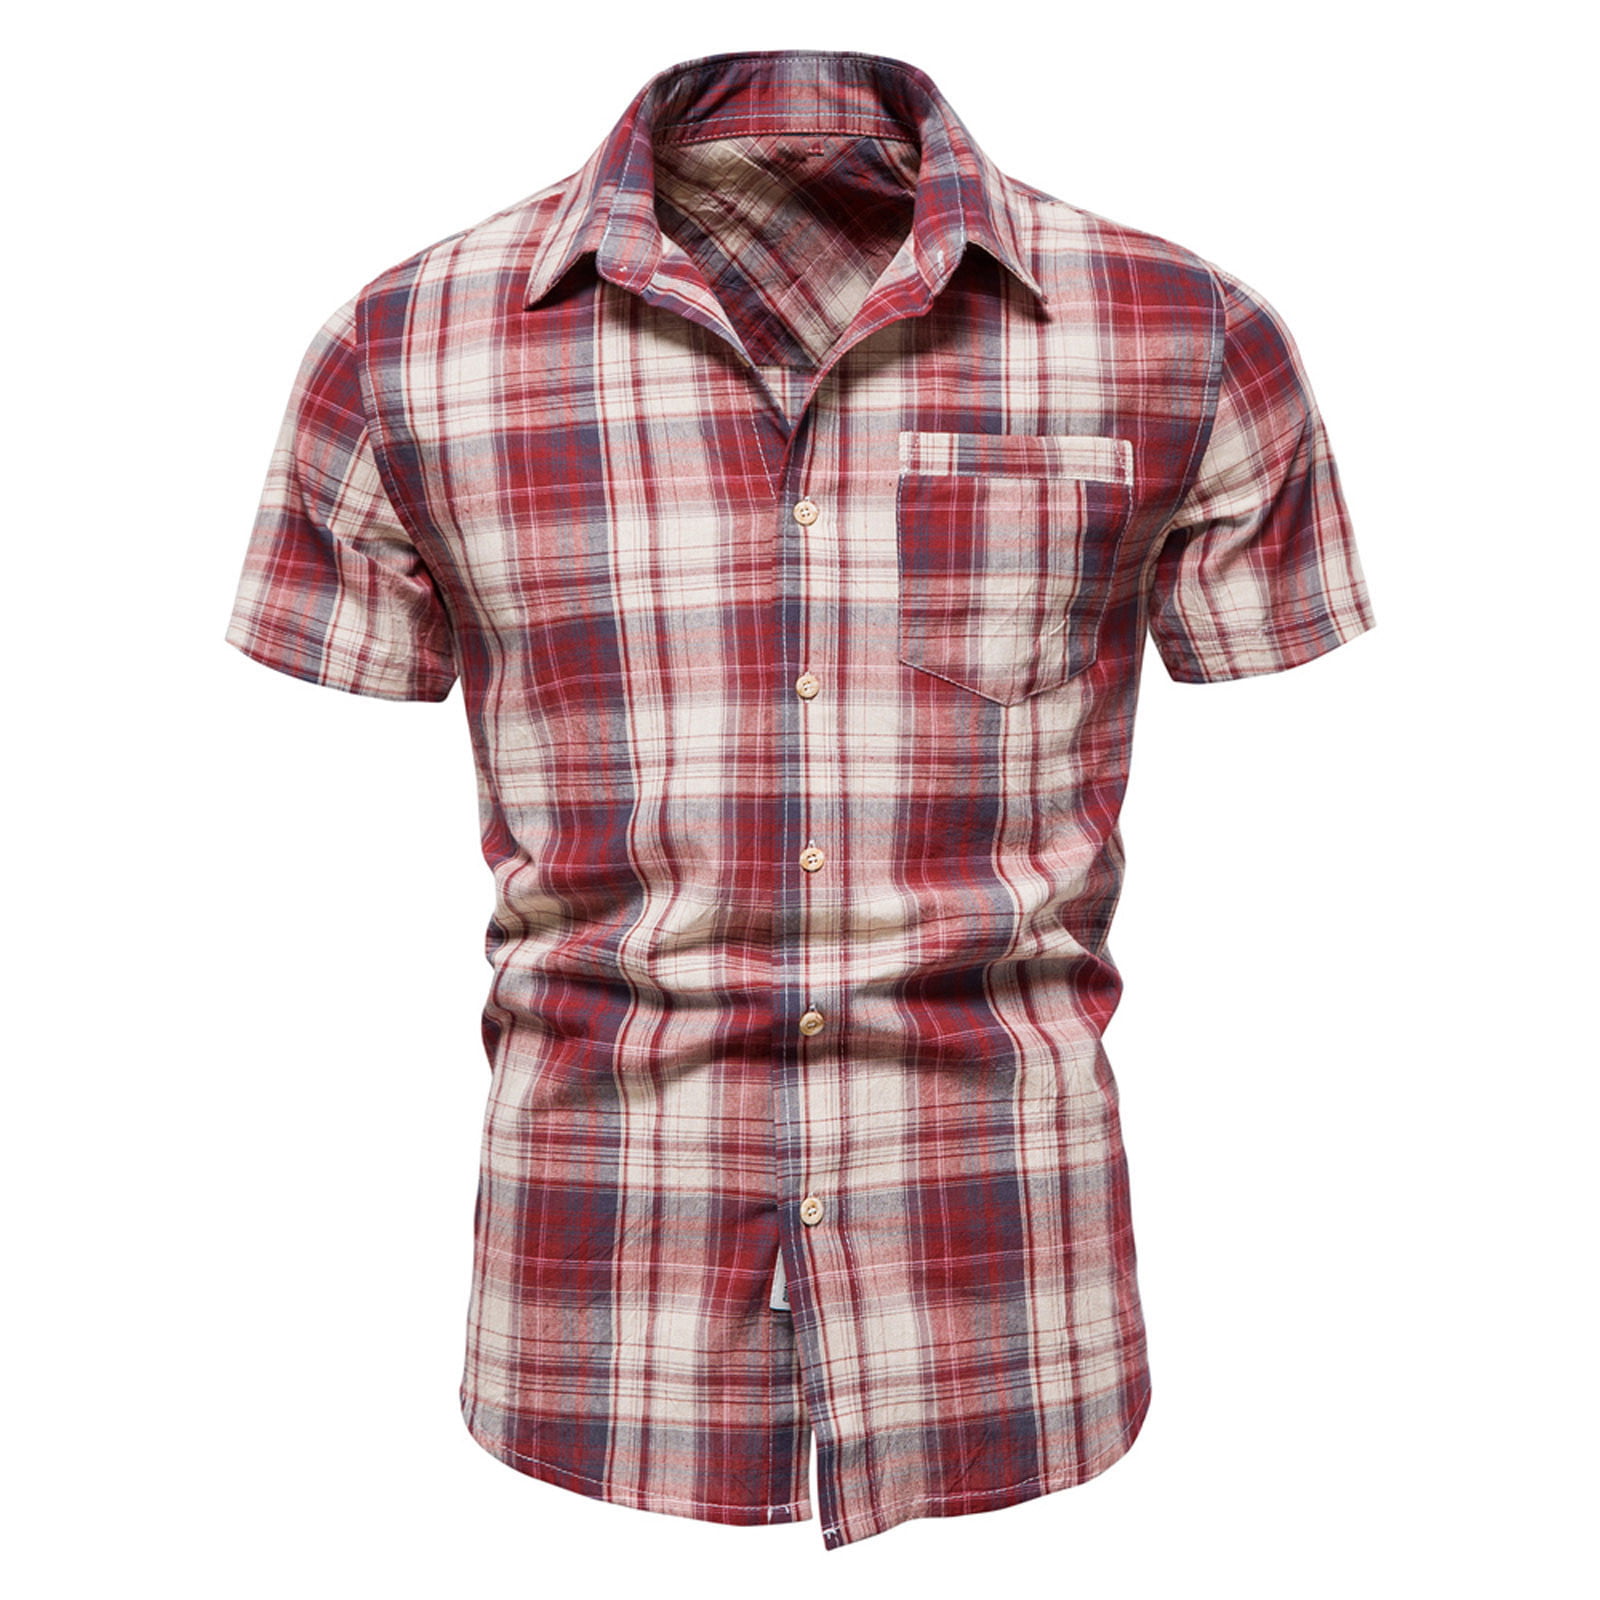 Men's Western Plaid Shirt Snap Buttons Two Pockets Casual Short Sleeve ...